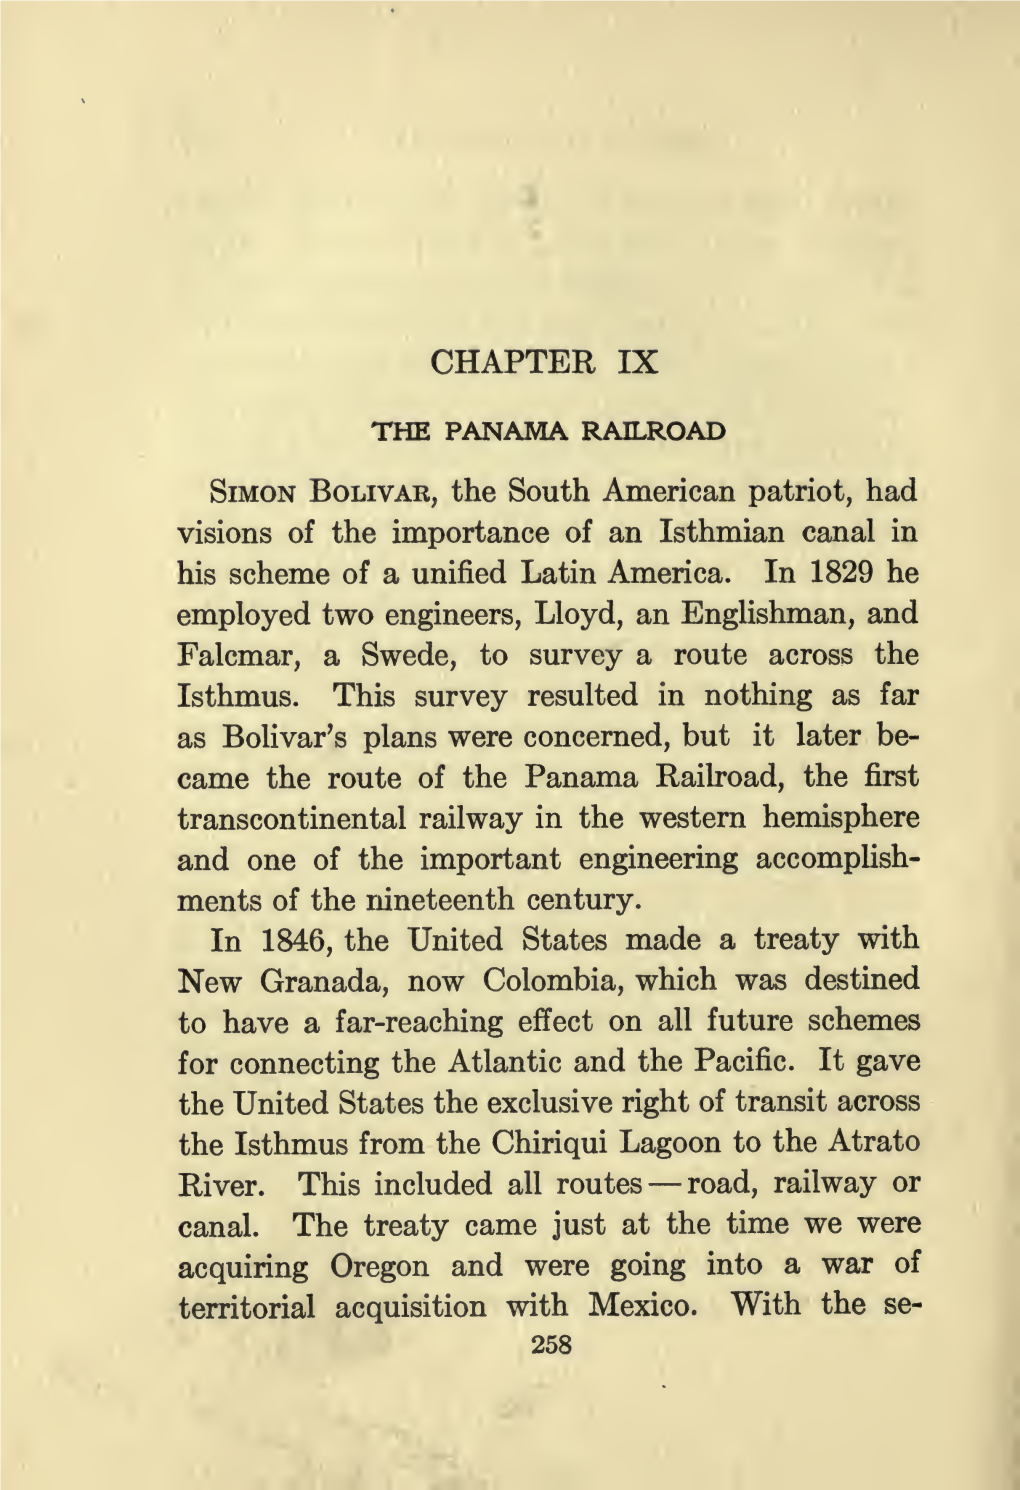 The Story of Panama: the New Route to India